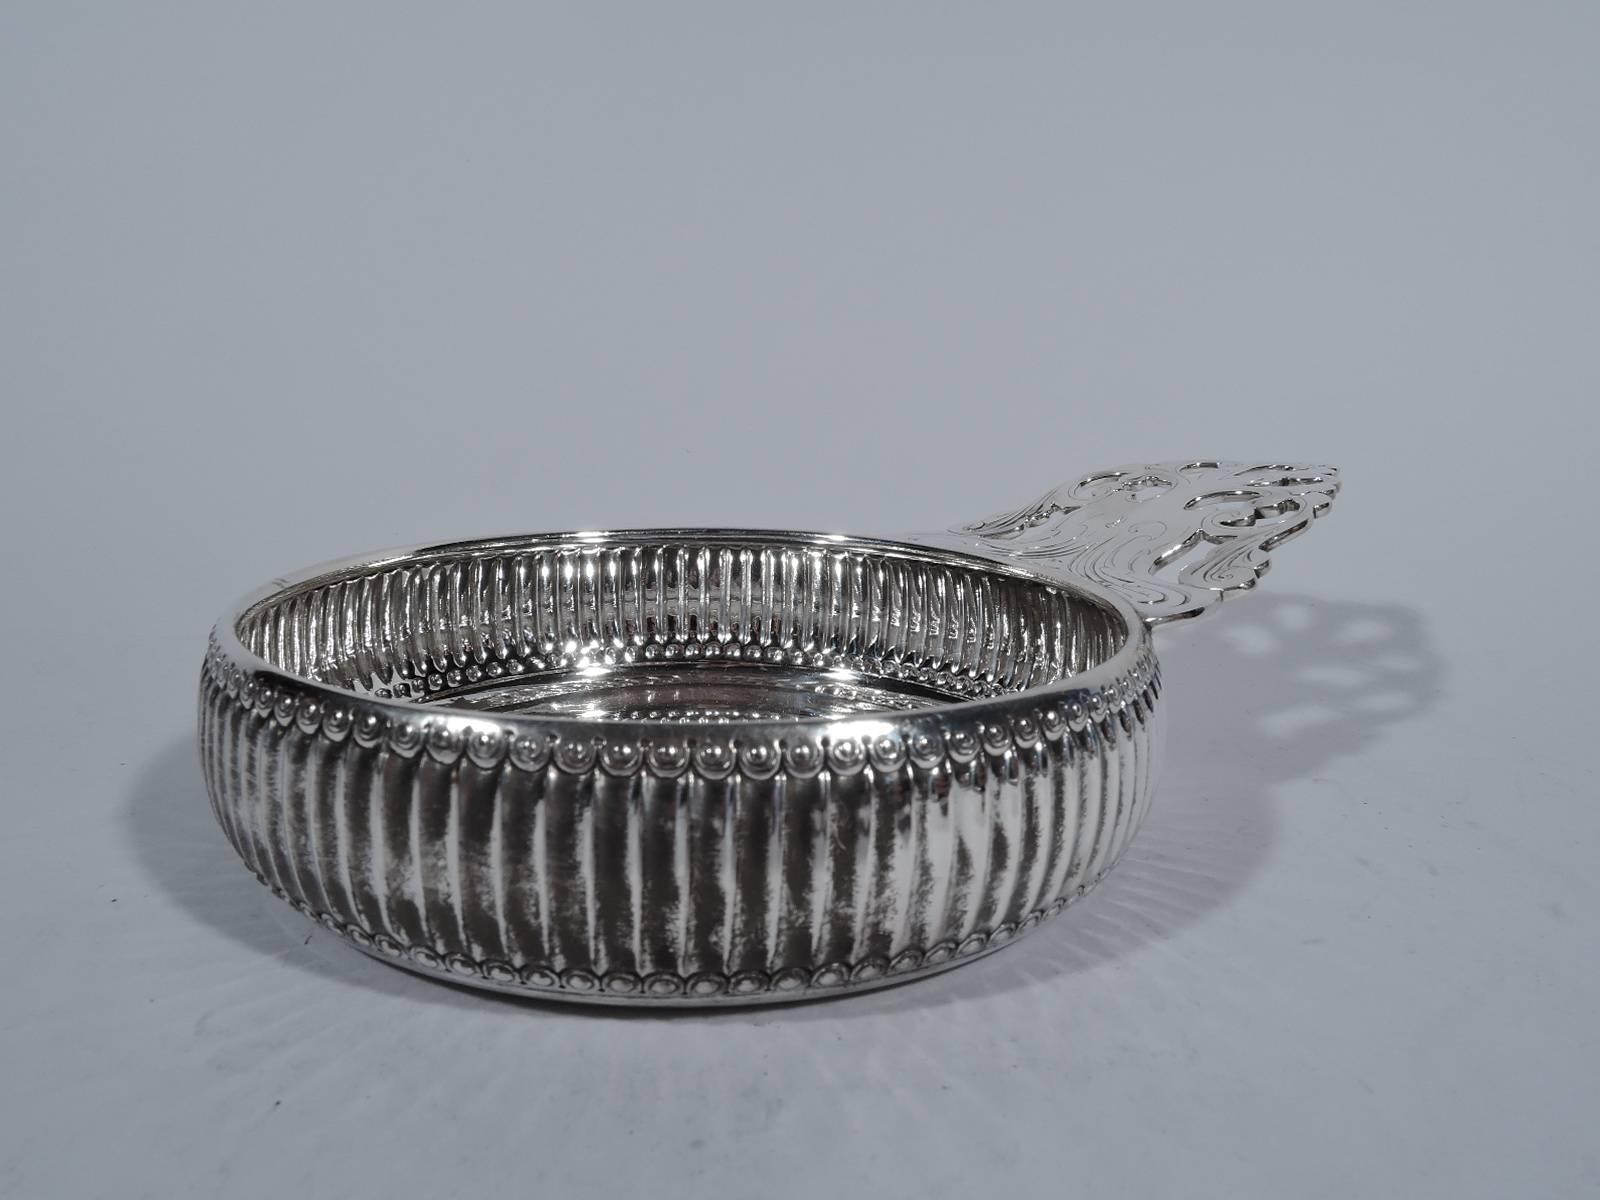 Unusual sterling silver porringer. Made by Tiffany & Co. in New York, circa 1883. Sides fluted between egg-and-dart borders. Open tree handle heightened with fluid engraving. Hallmark includes pattern no. 7519 (first produced in 1883) and director’s